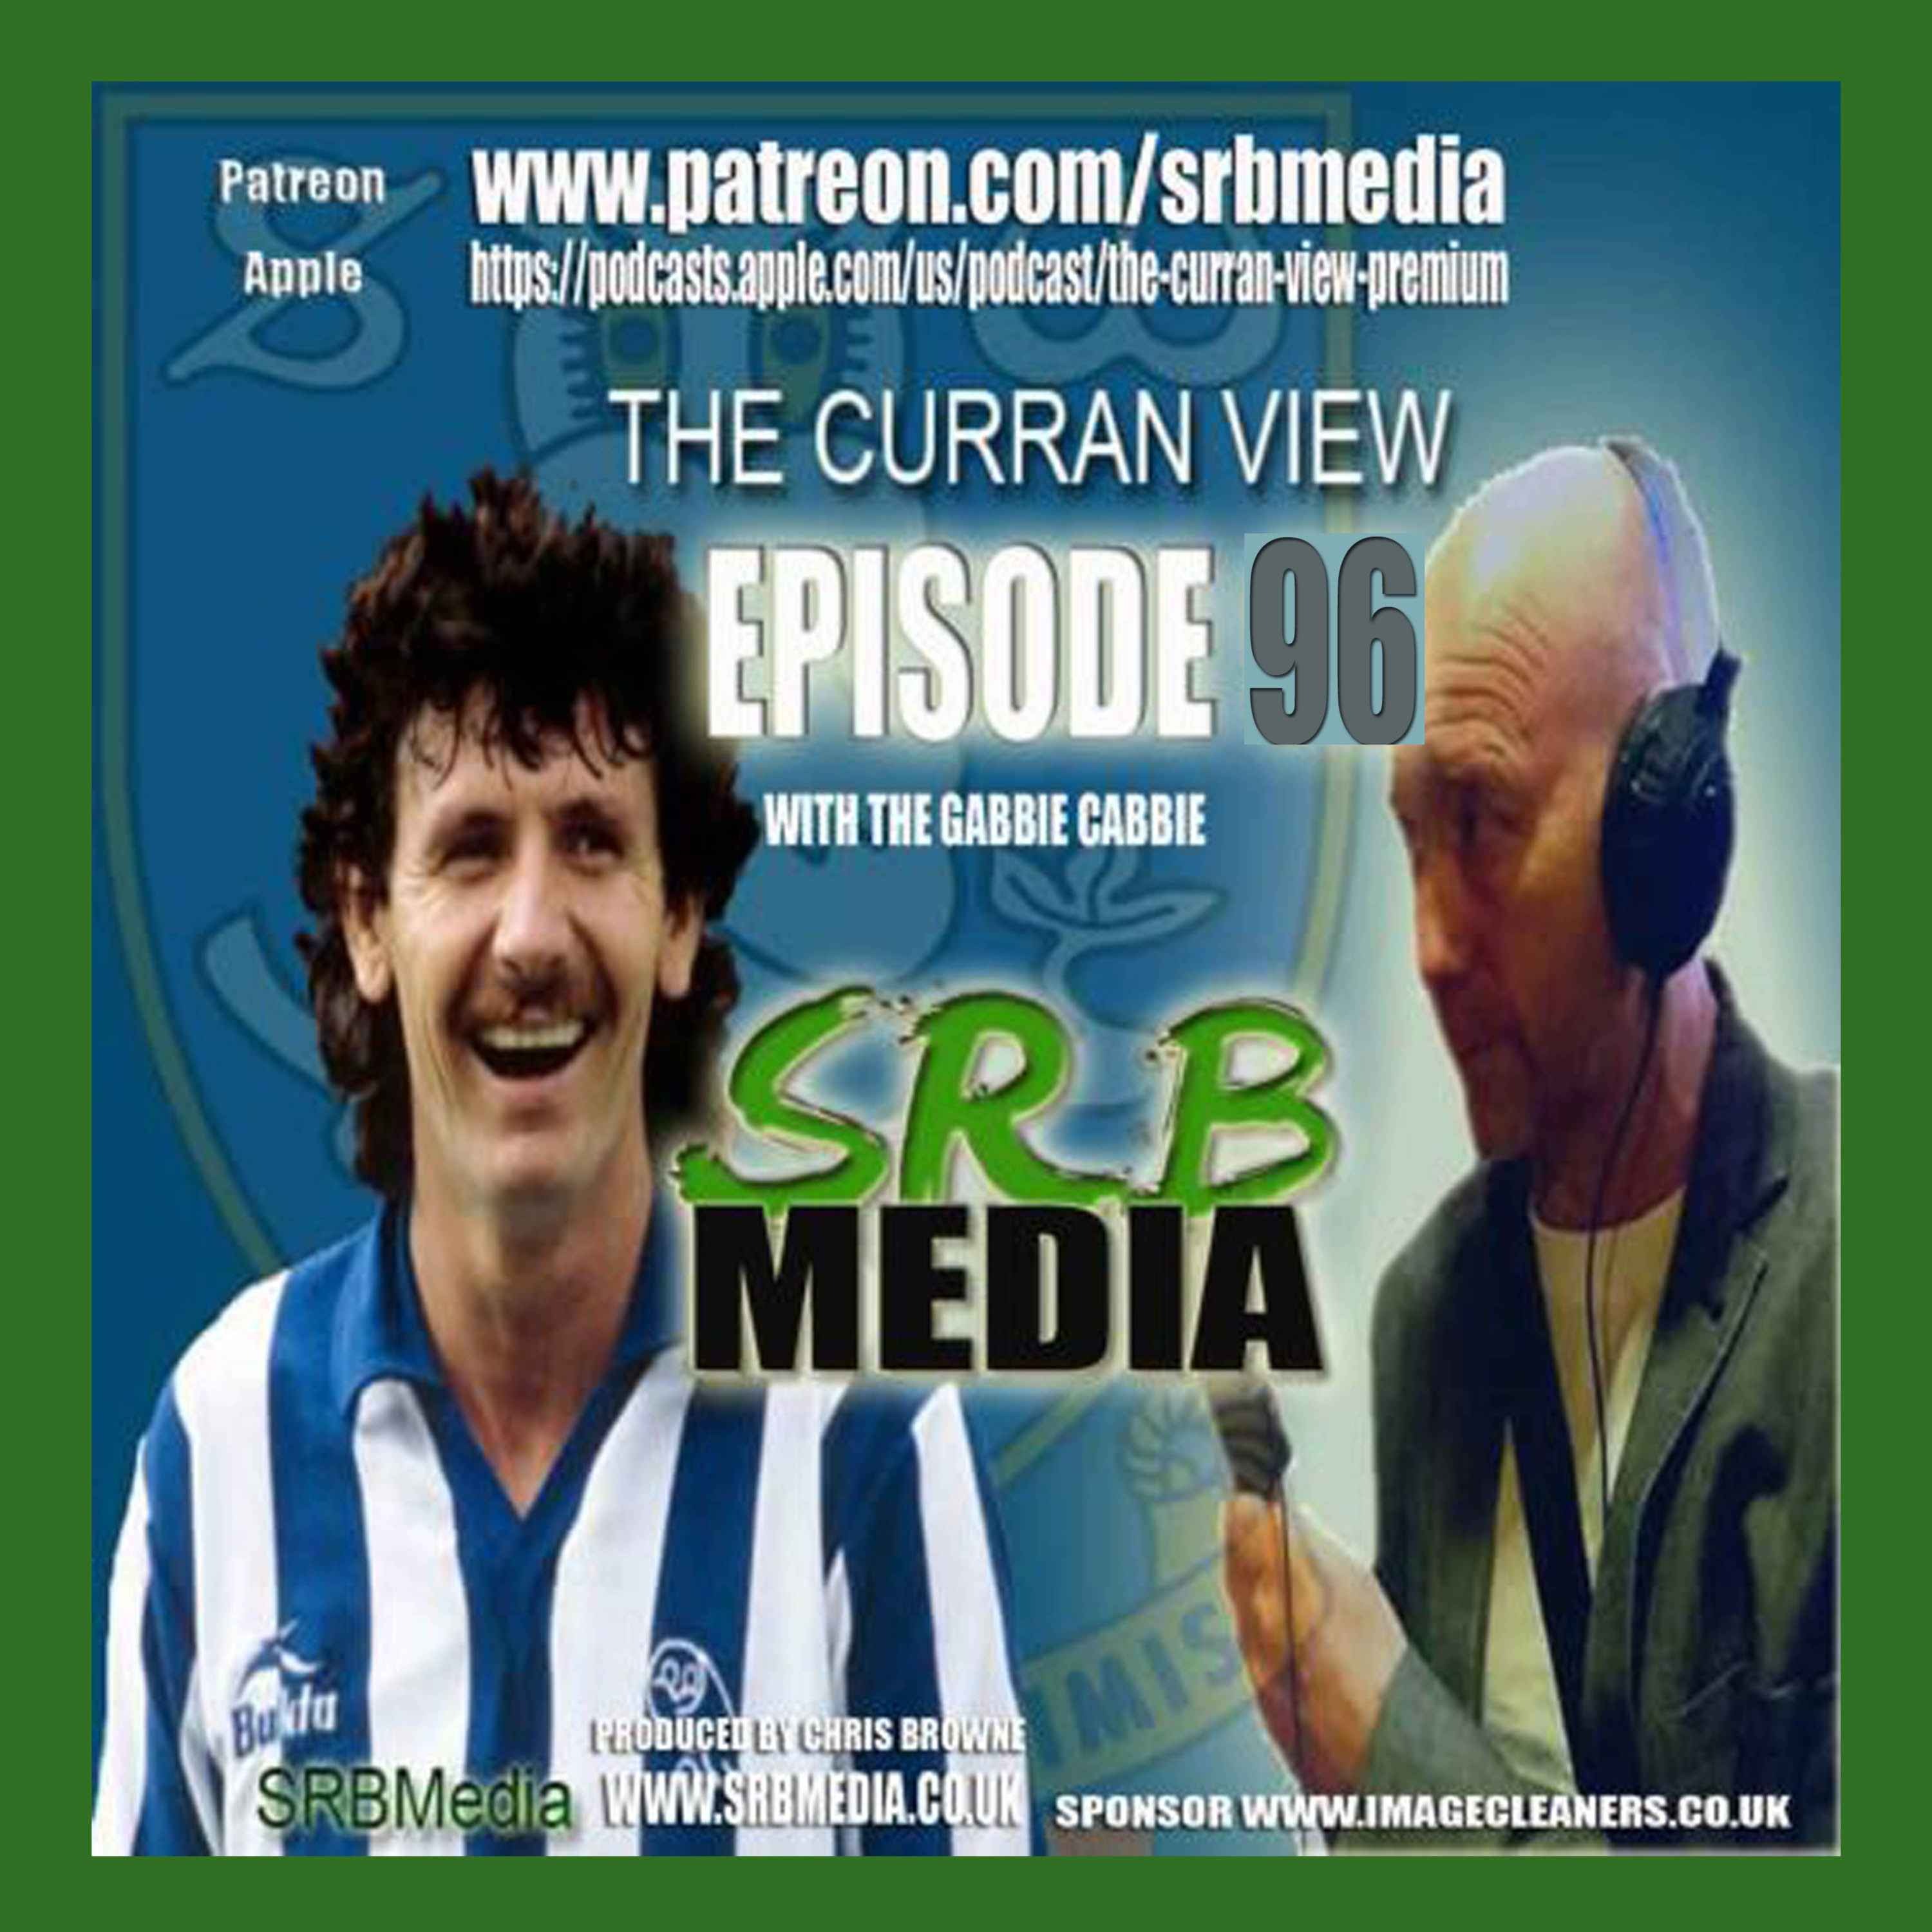 cover art for The Curran View Episode 96